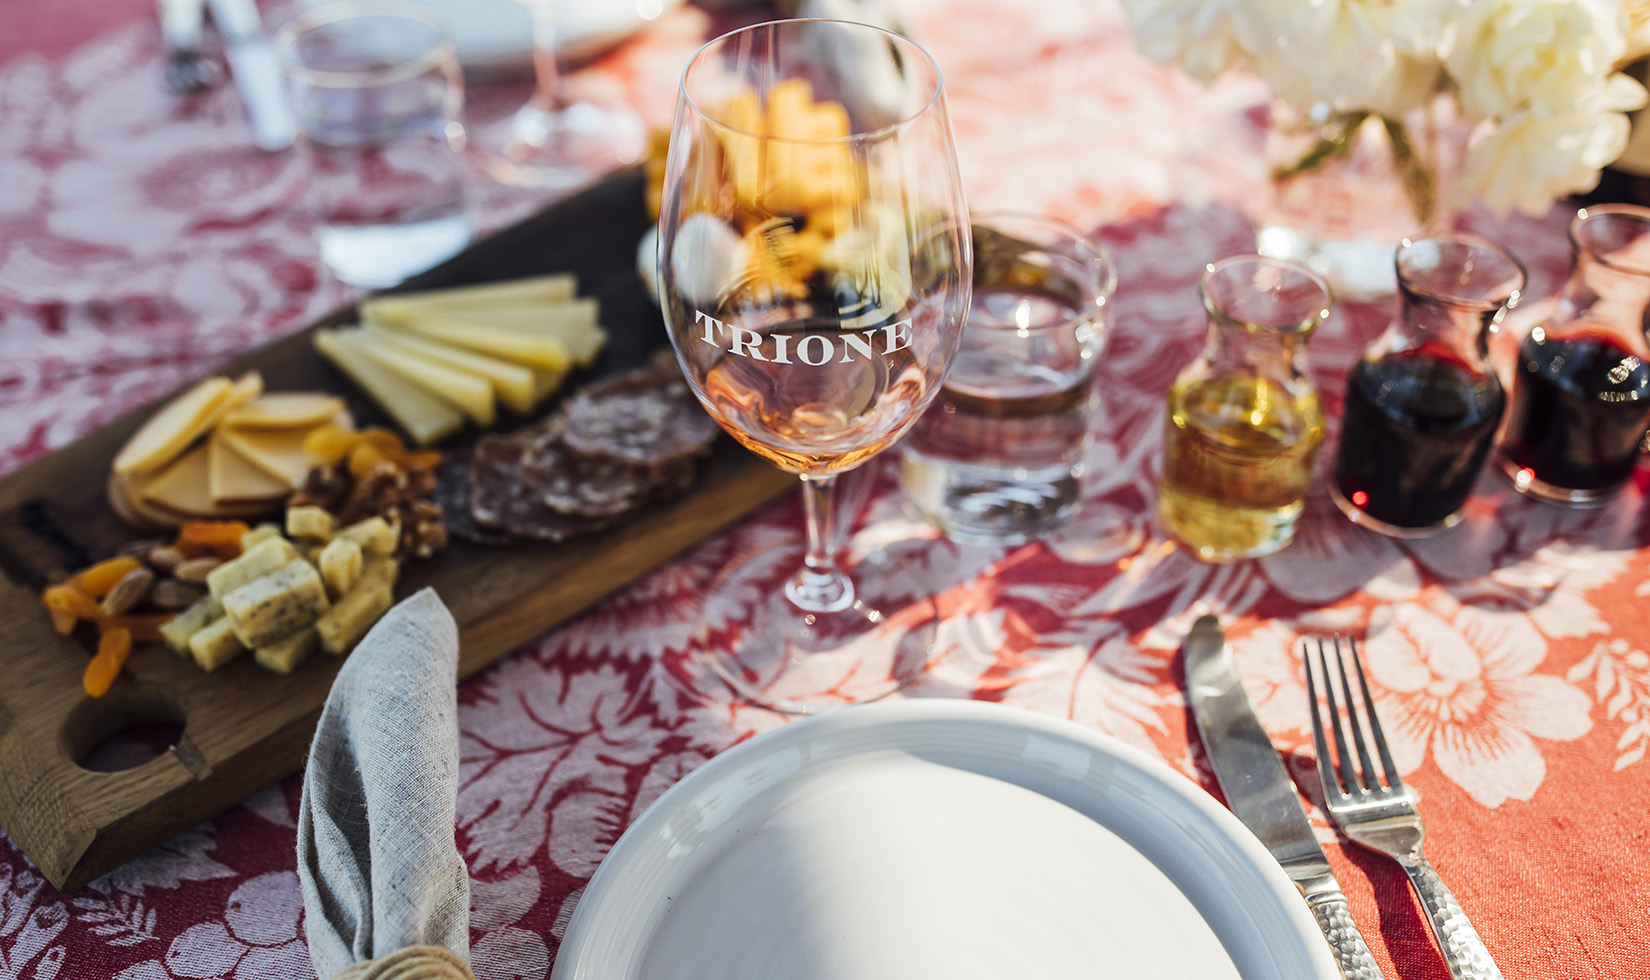 table setting with orange tablecloth, white plate, wine glass etched with Trione and cheese plate